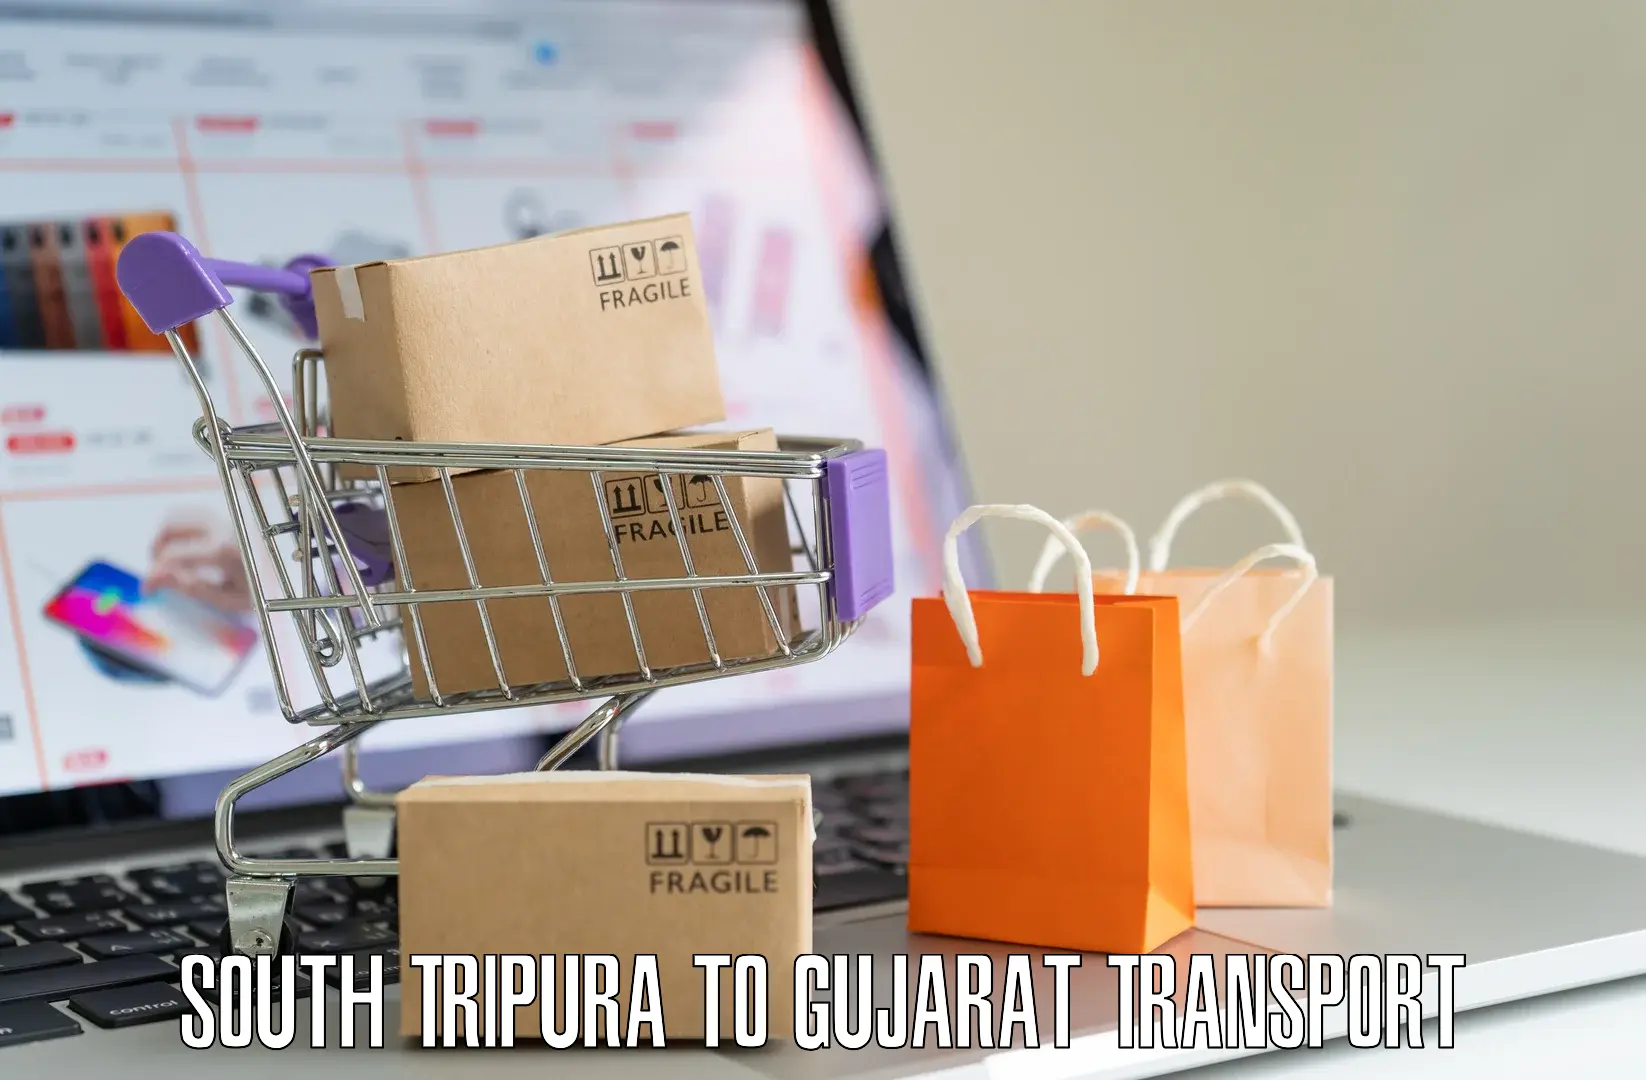 Commercial transport service South Tripura to Botad